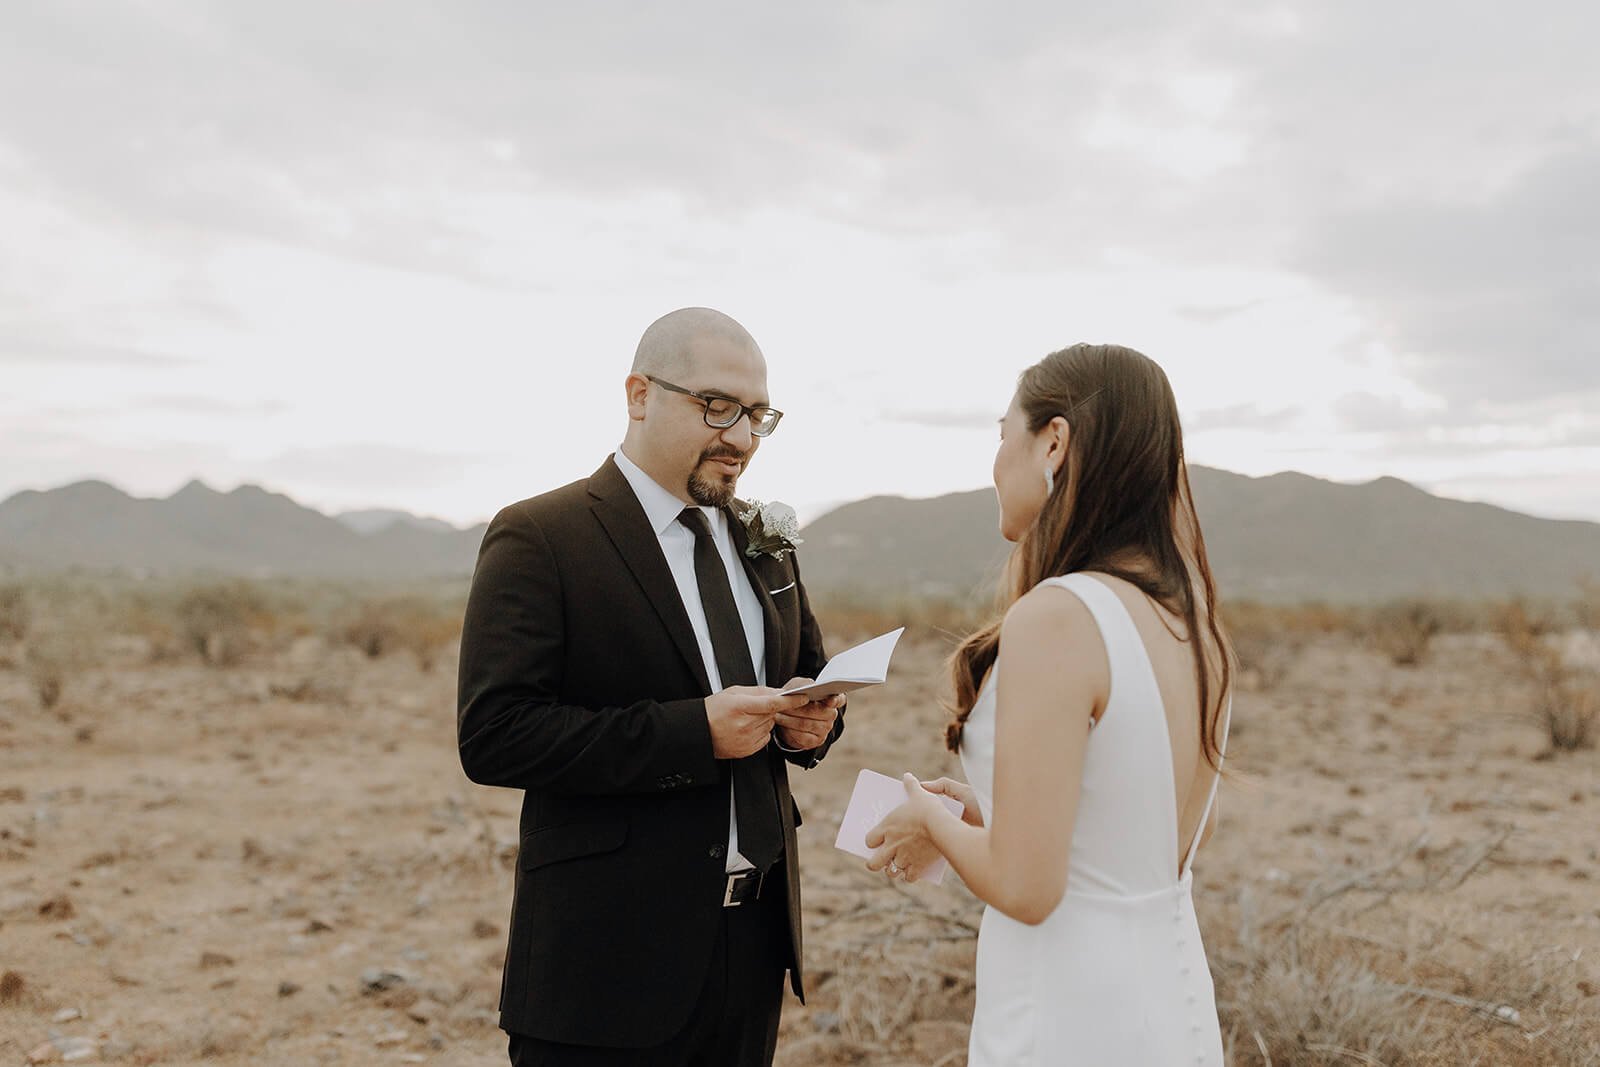 Bride and groom exchange personal vows in the Arizona desert